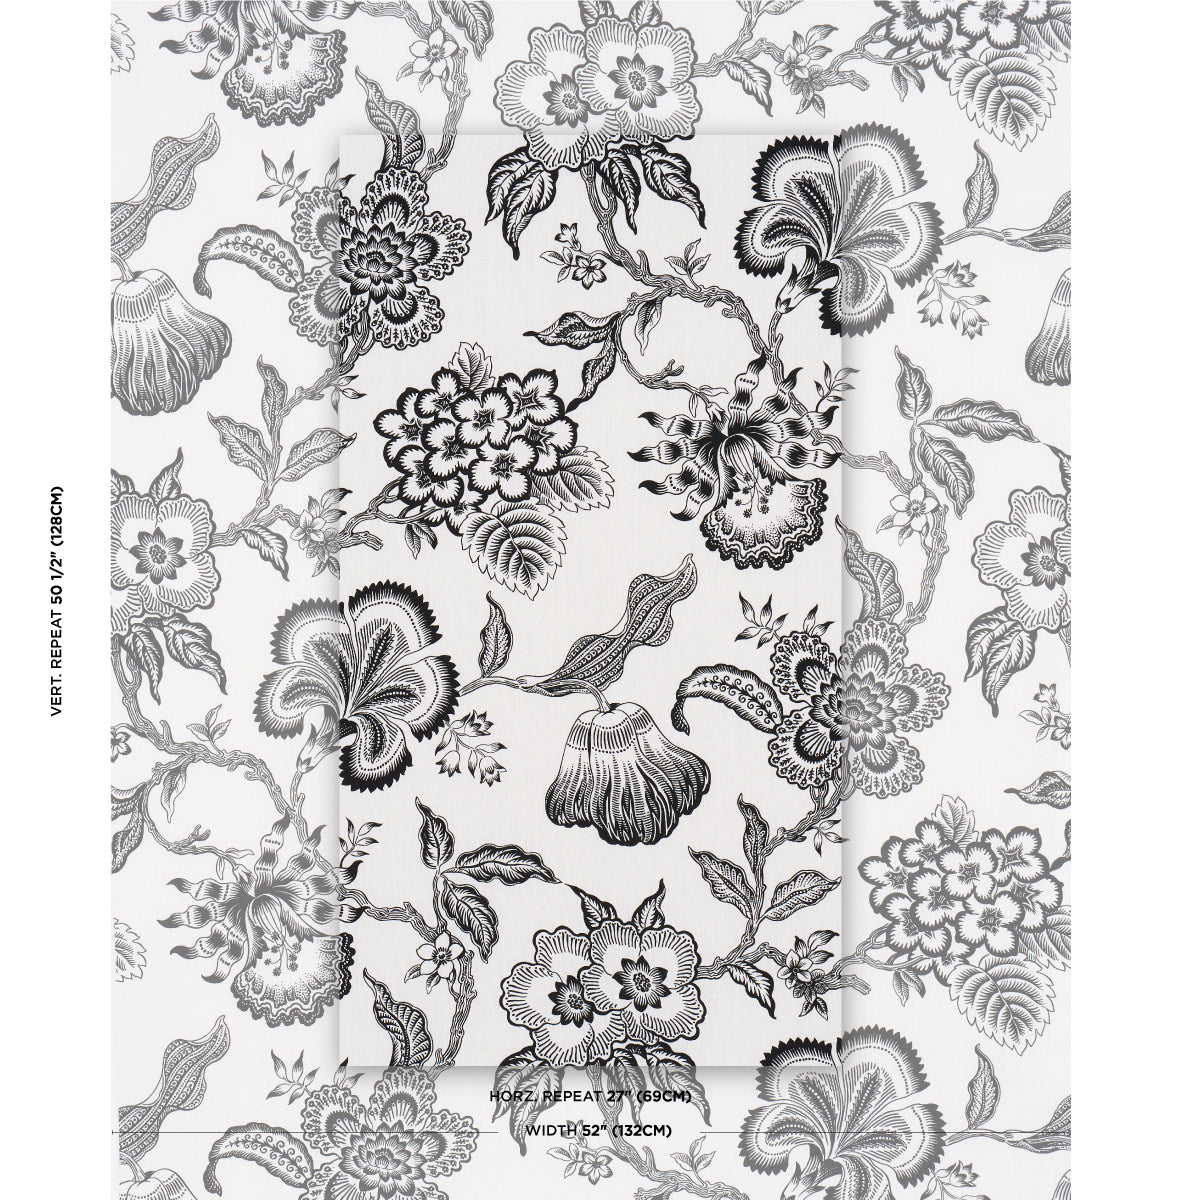 Purchase 181482 | Hothouse Flowers Silhouette, Black & White - Schumacher Fabric